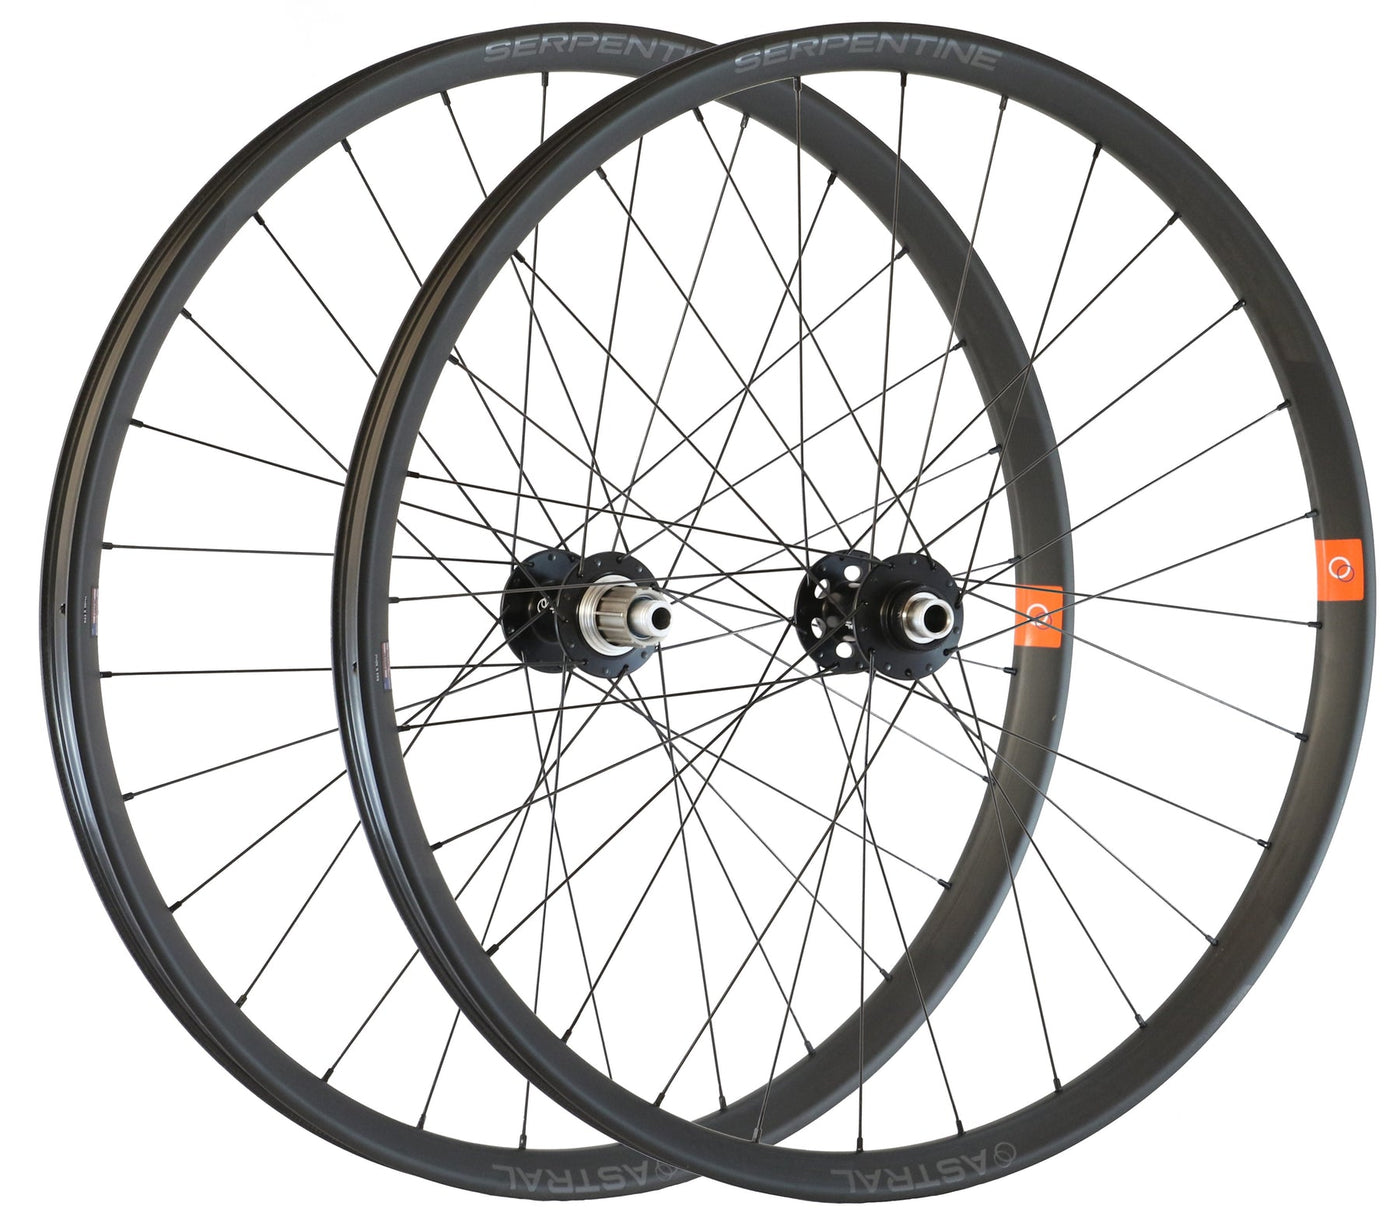 Astral Serpentine Carbon Disc Rims to Astral Approach BOOST CL Hubs